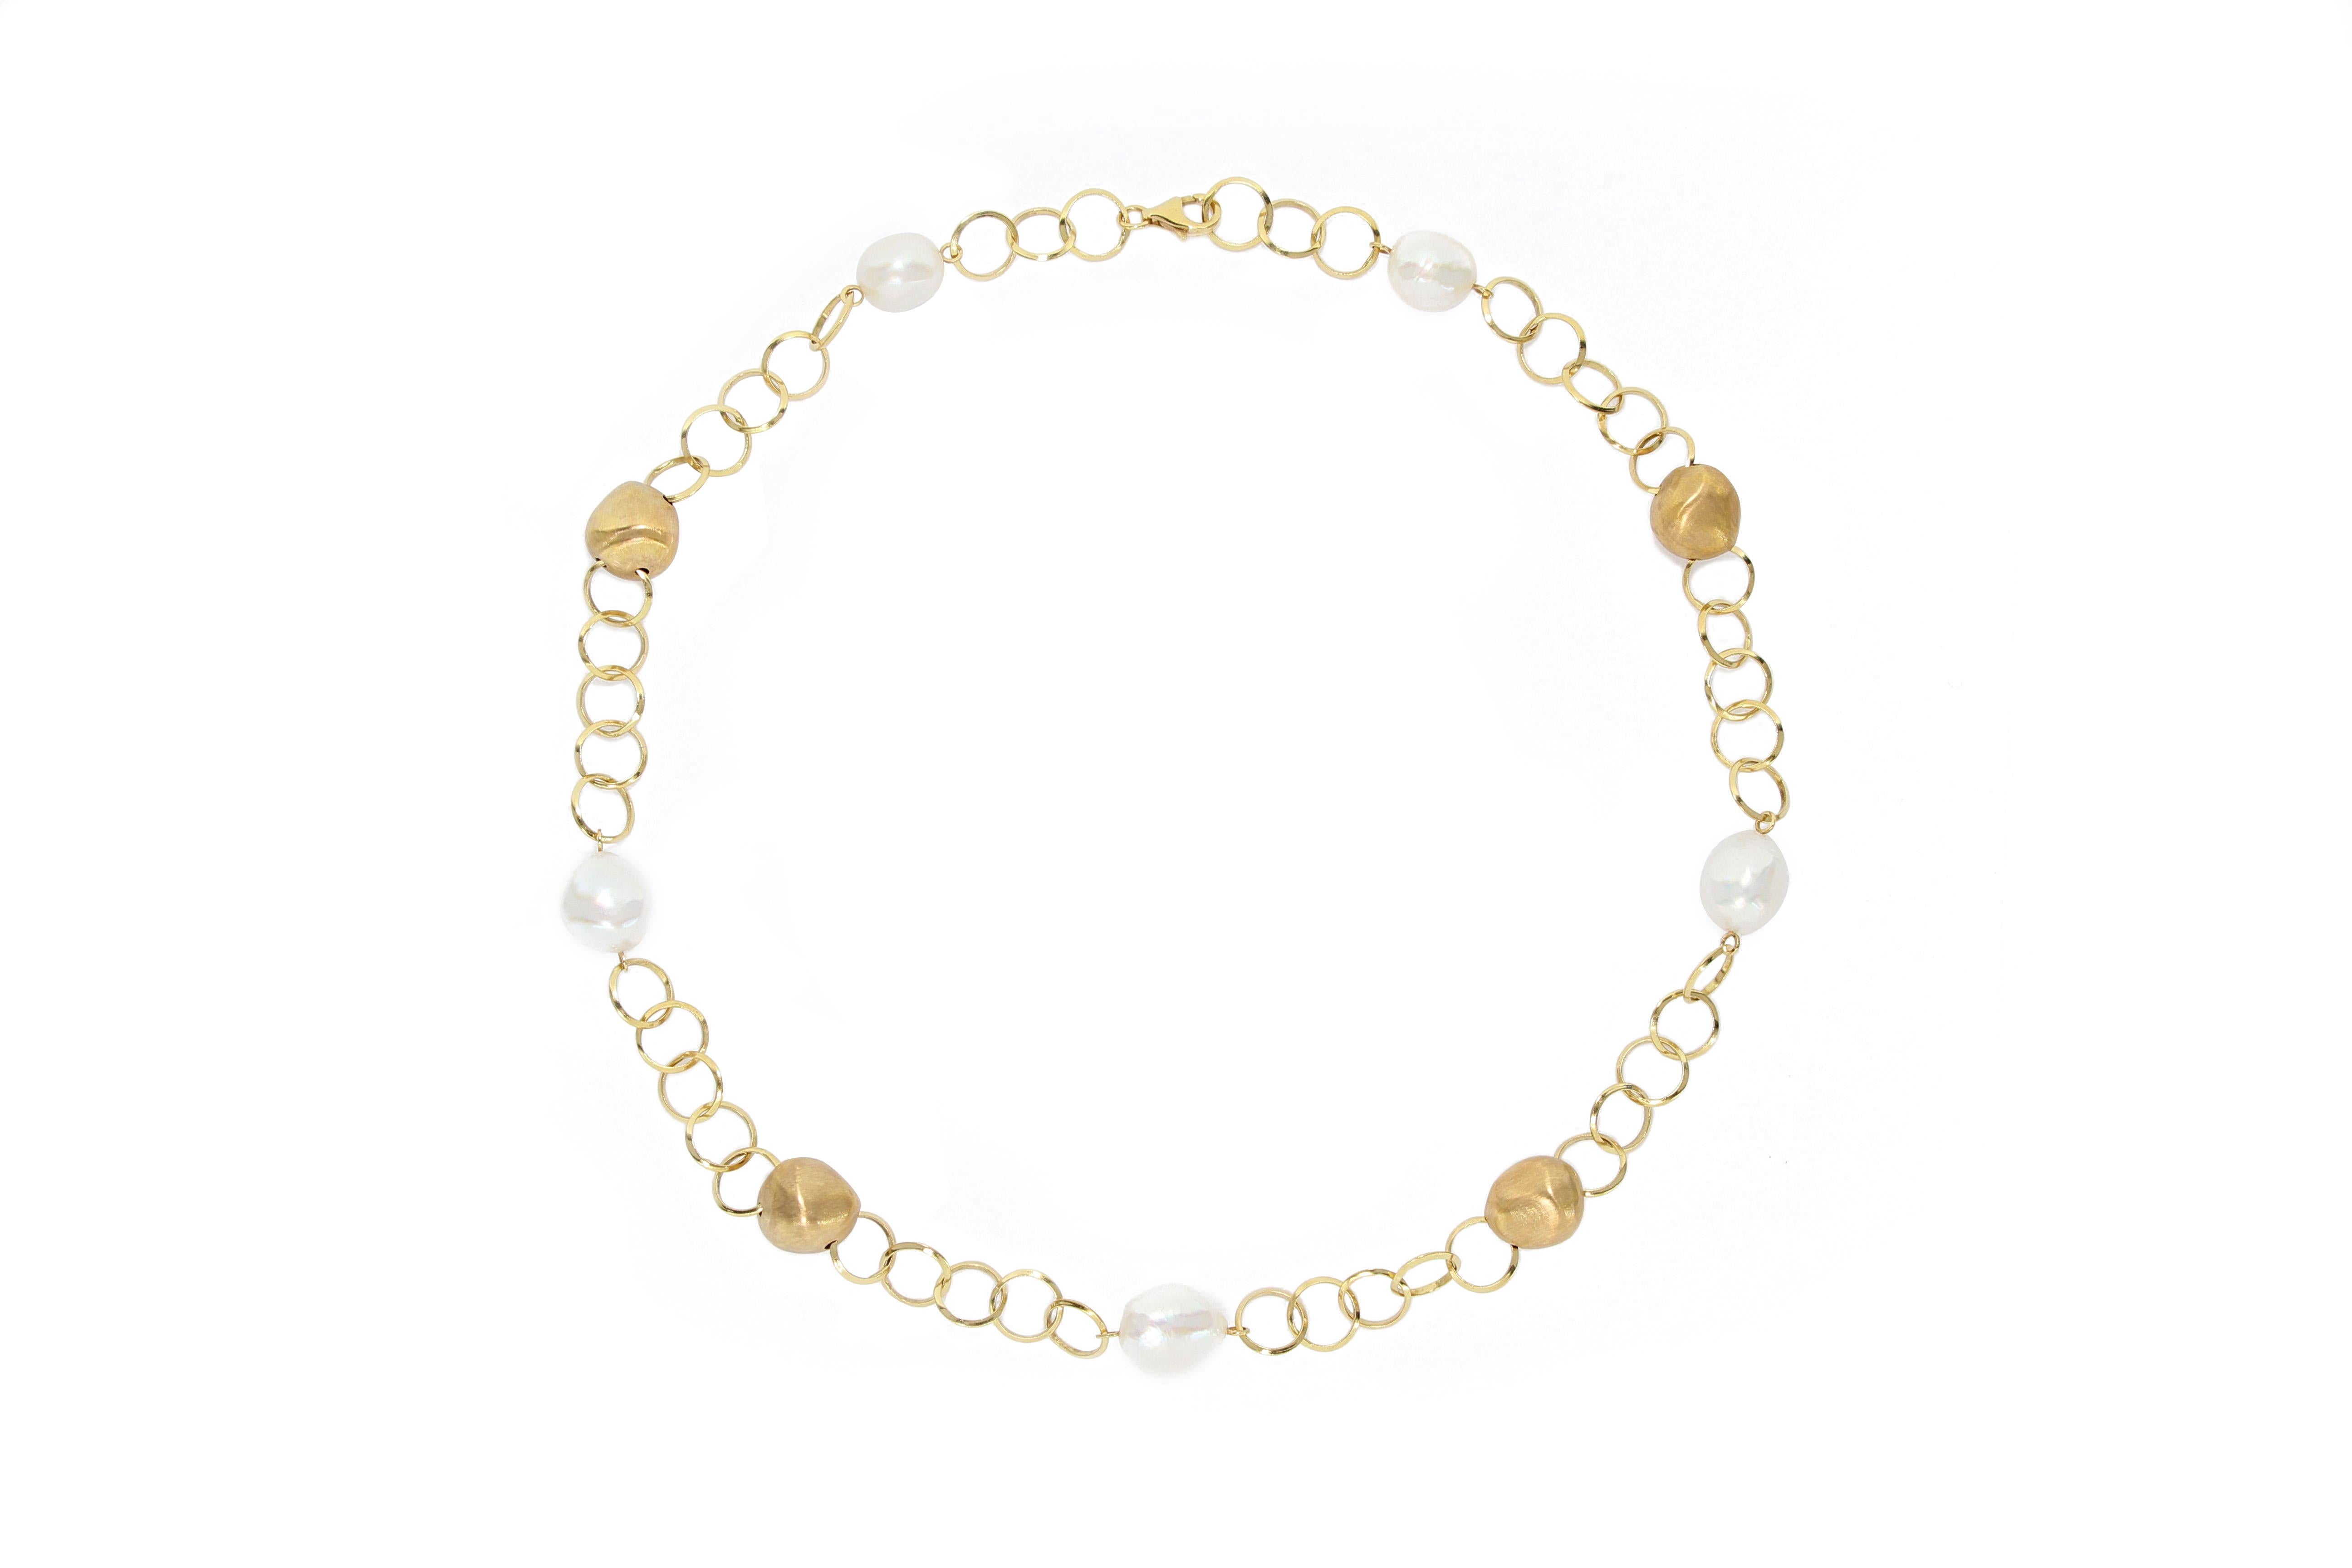 A stylish chain necklace made of 18 karat  gold  with brushed finish, decorated with 5 irregular shape freshwater pearls, designed and crafted in Italy, perfect match with jeans and casual wear.
The company is renowned for its high jewellery